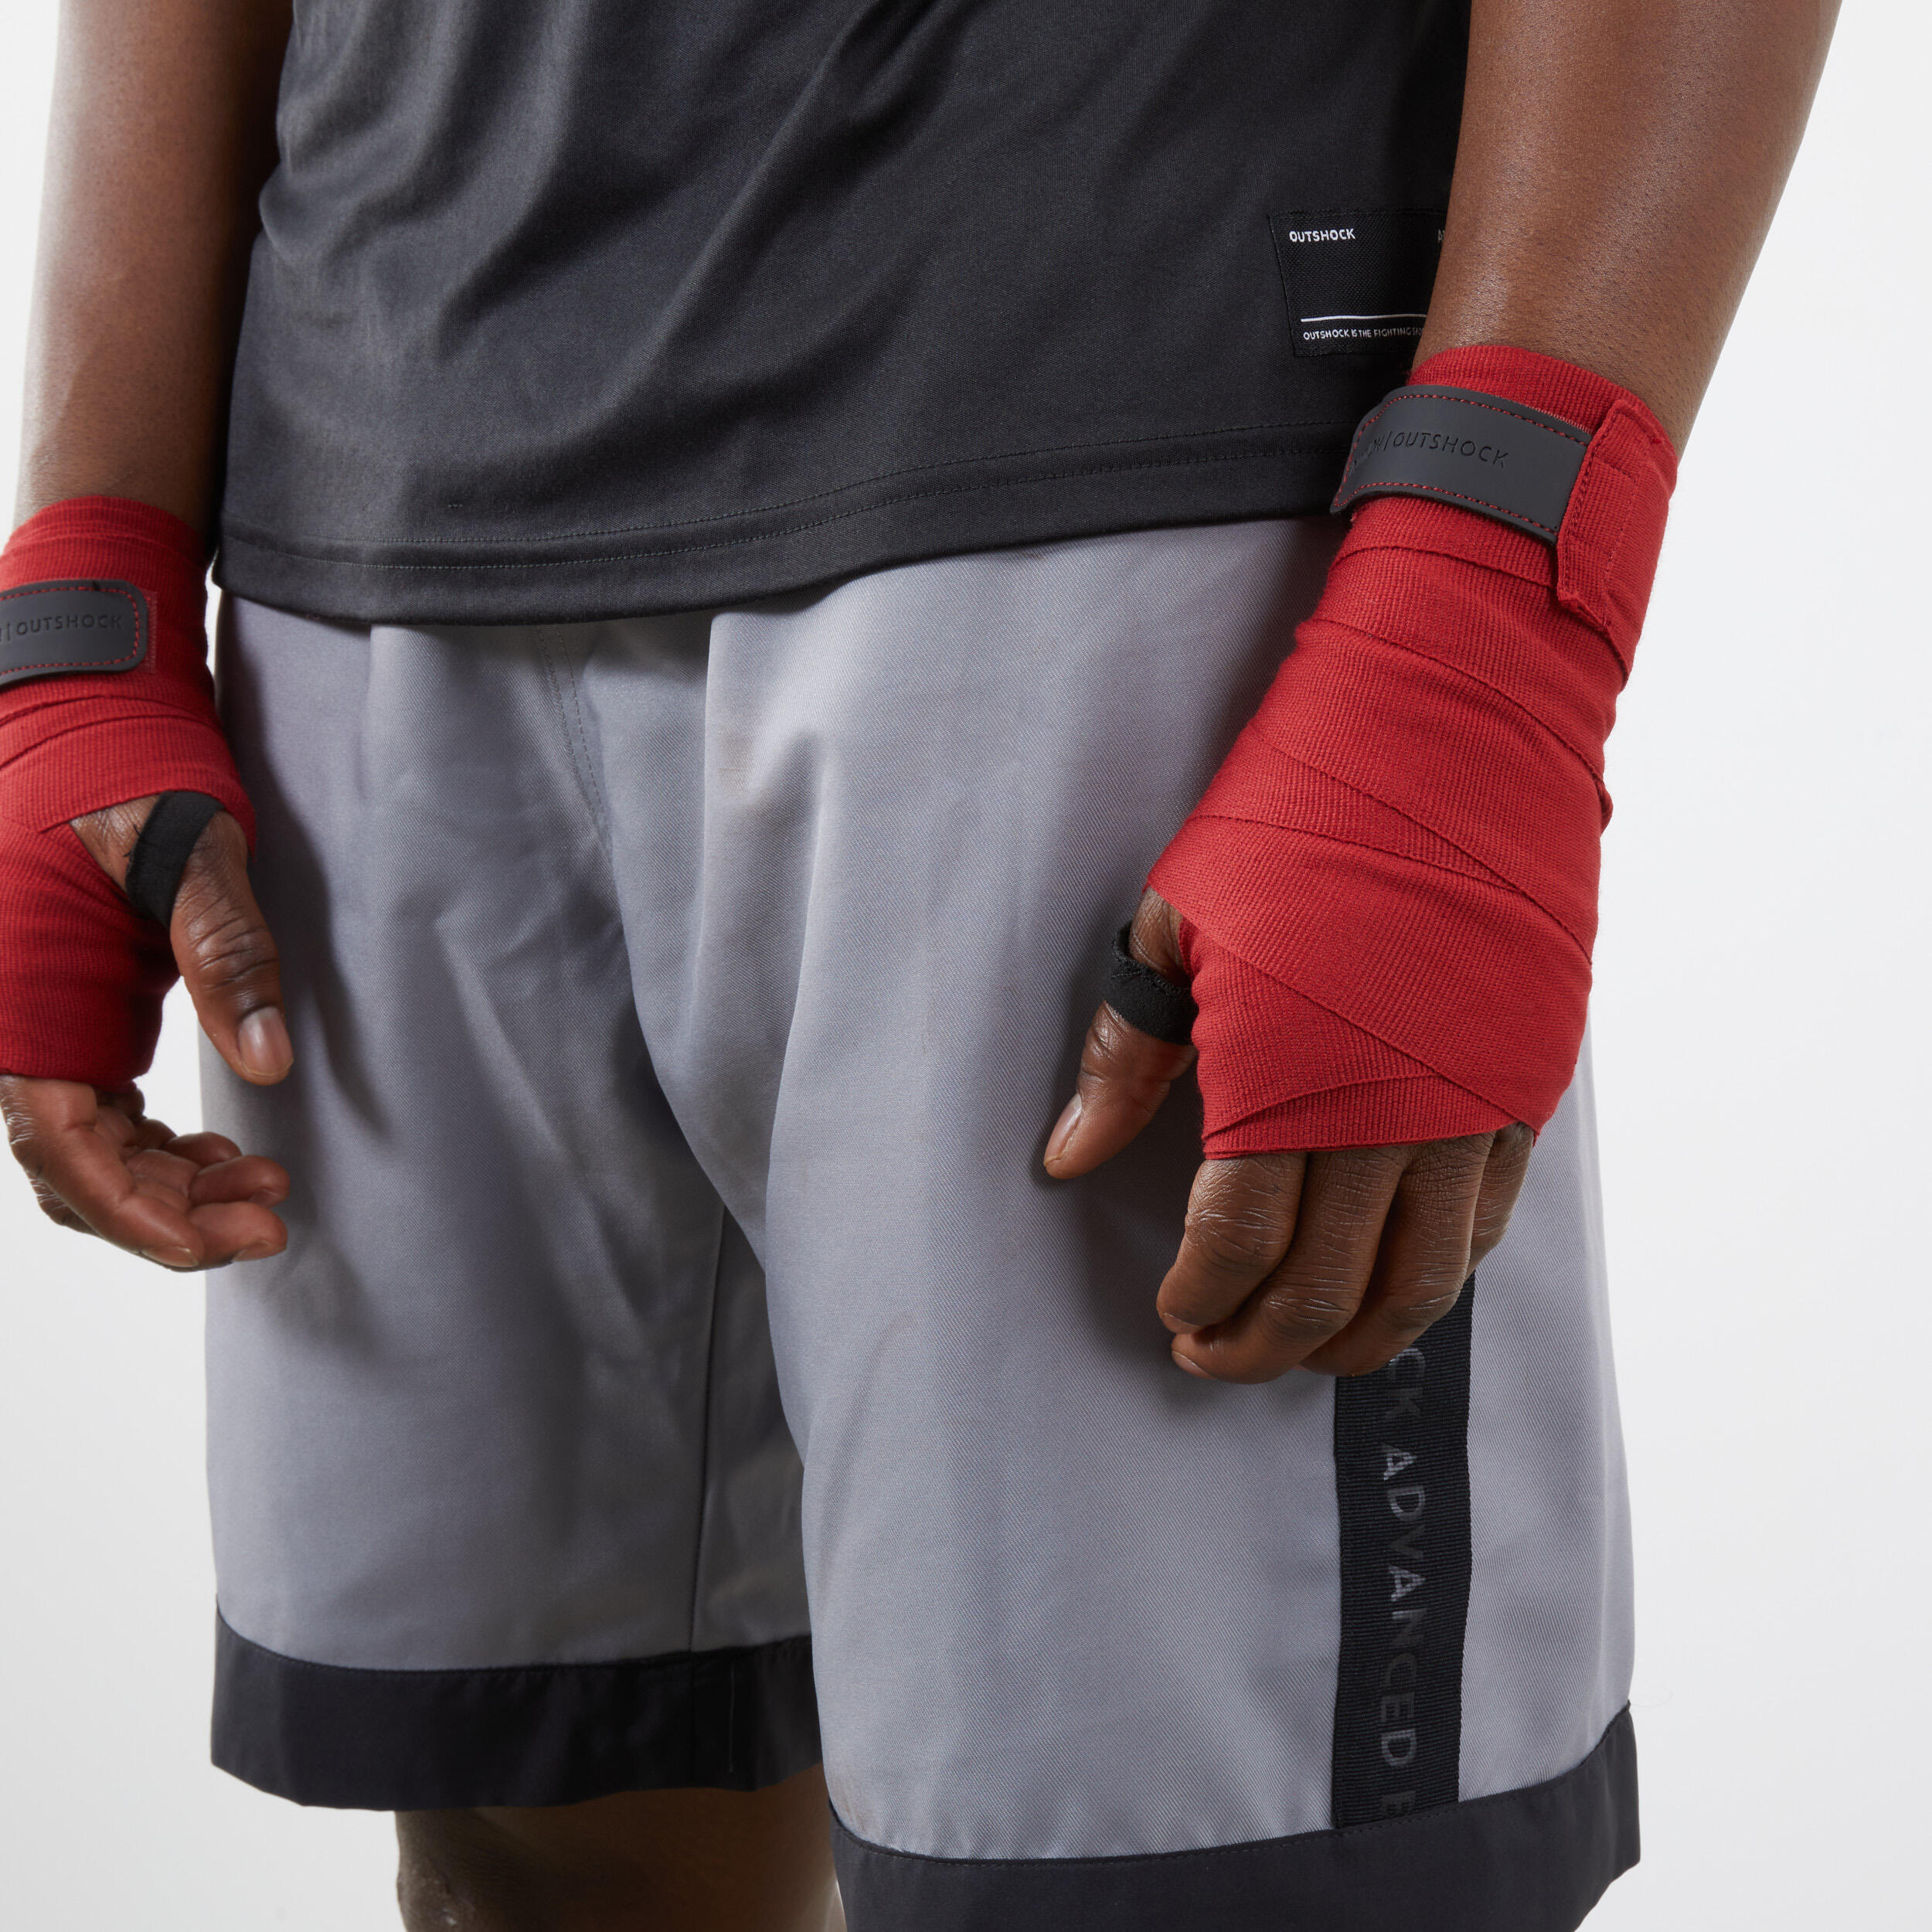 Boxing Wraps 4m - Red 4/6